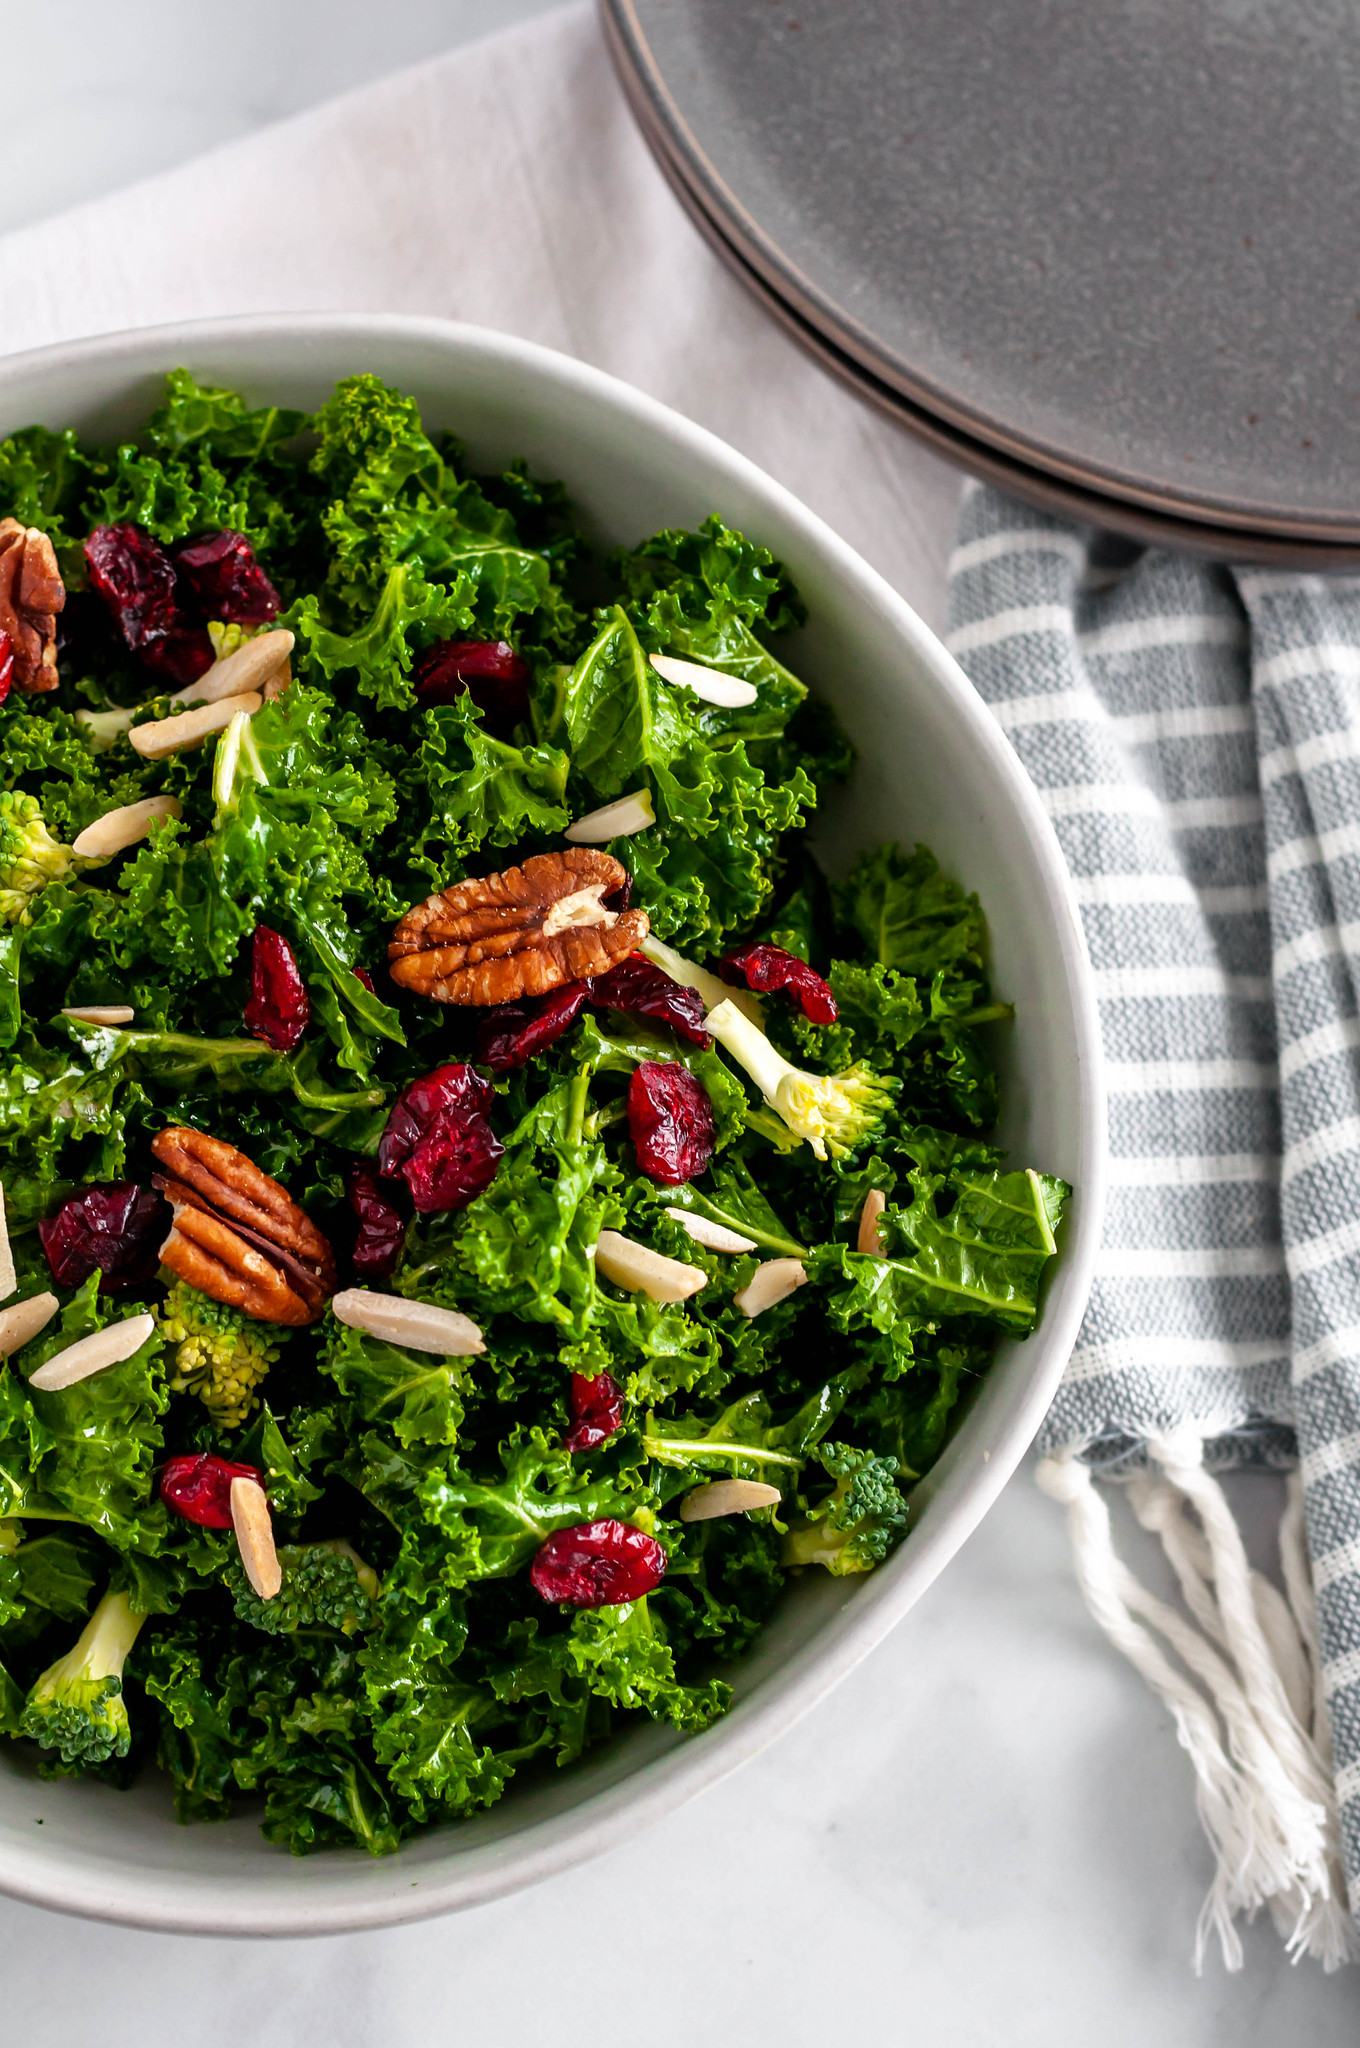 This Copycat Chick-fil-A Superfoods Salad is so simple to make and tastes so similar to the restaurant version but healthier. Perfect for clean eating.